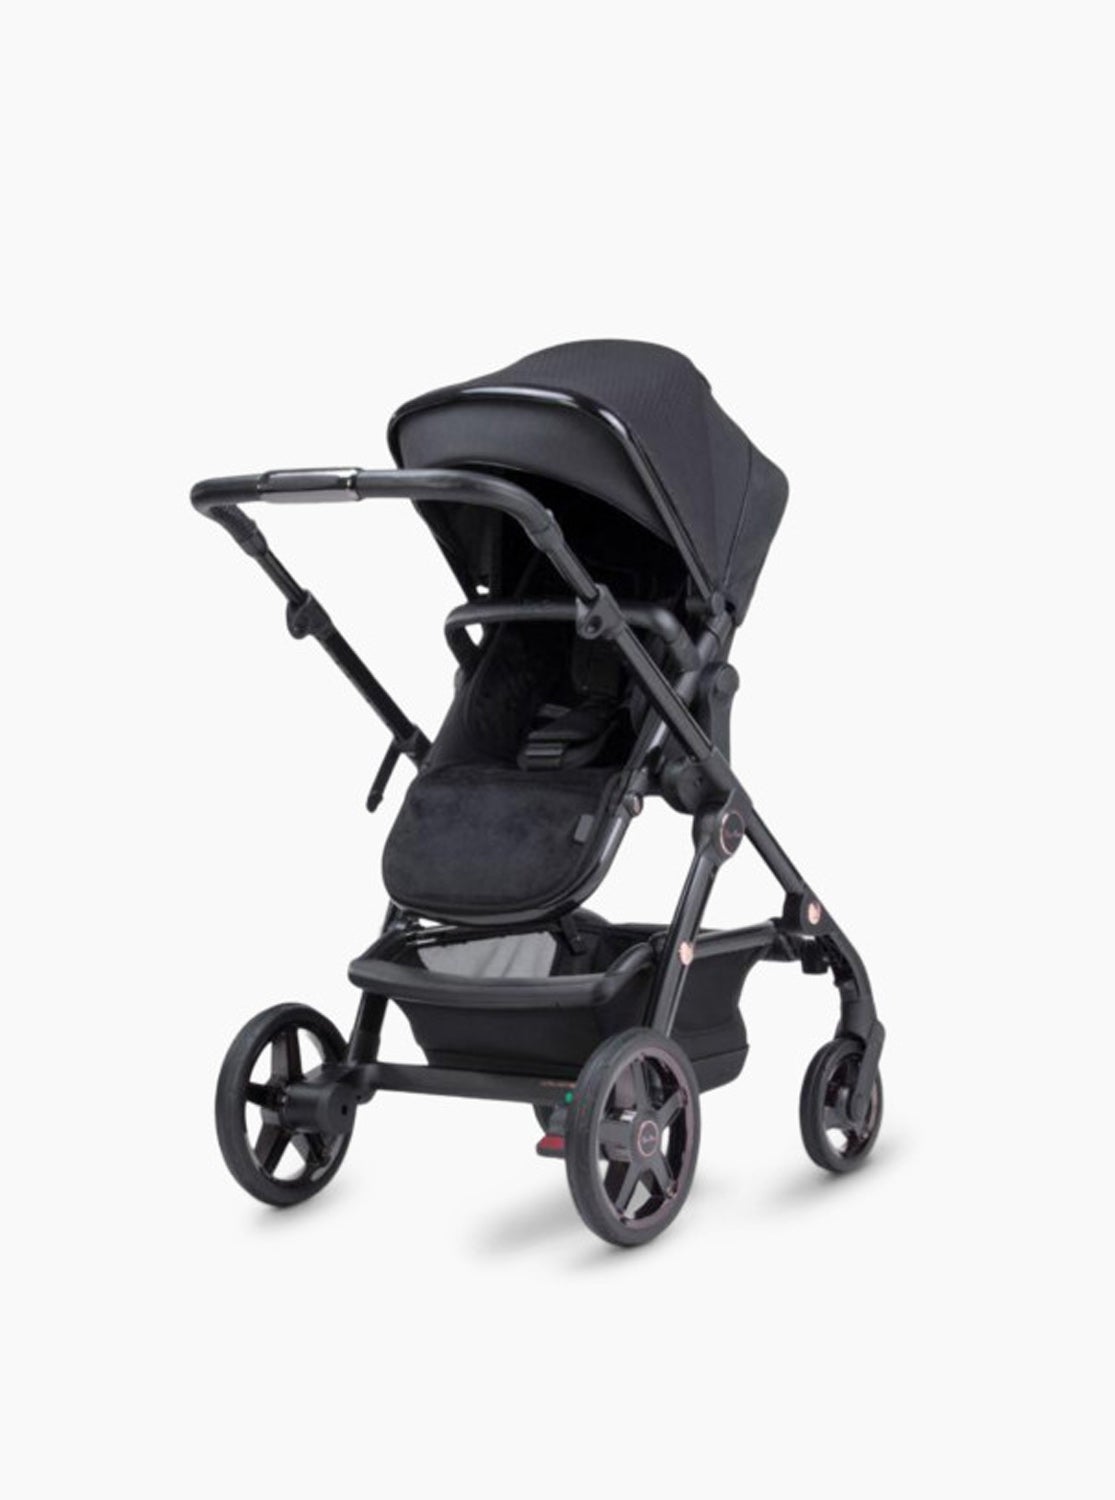 Silver Cross Wave Eclipse 2021 Special Edition Modular Stroller - ANB Baby -$1000 - $2000